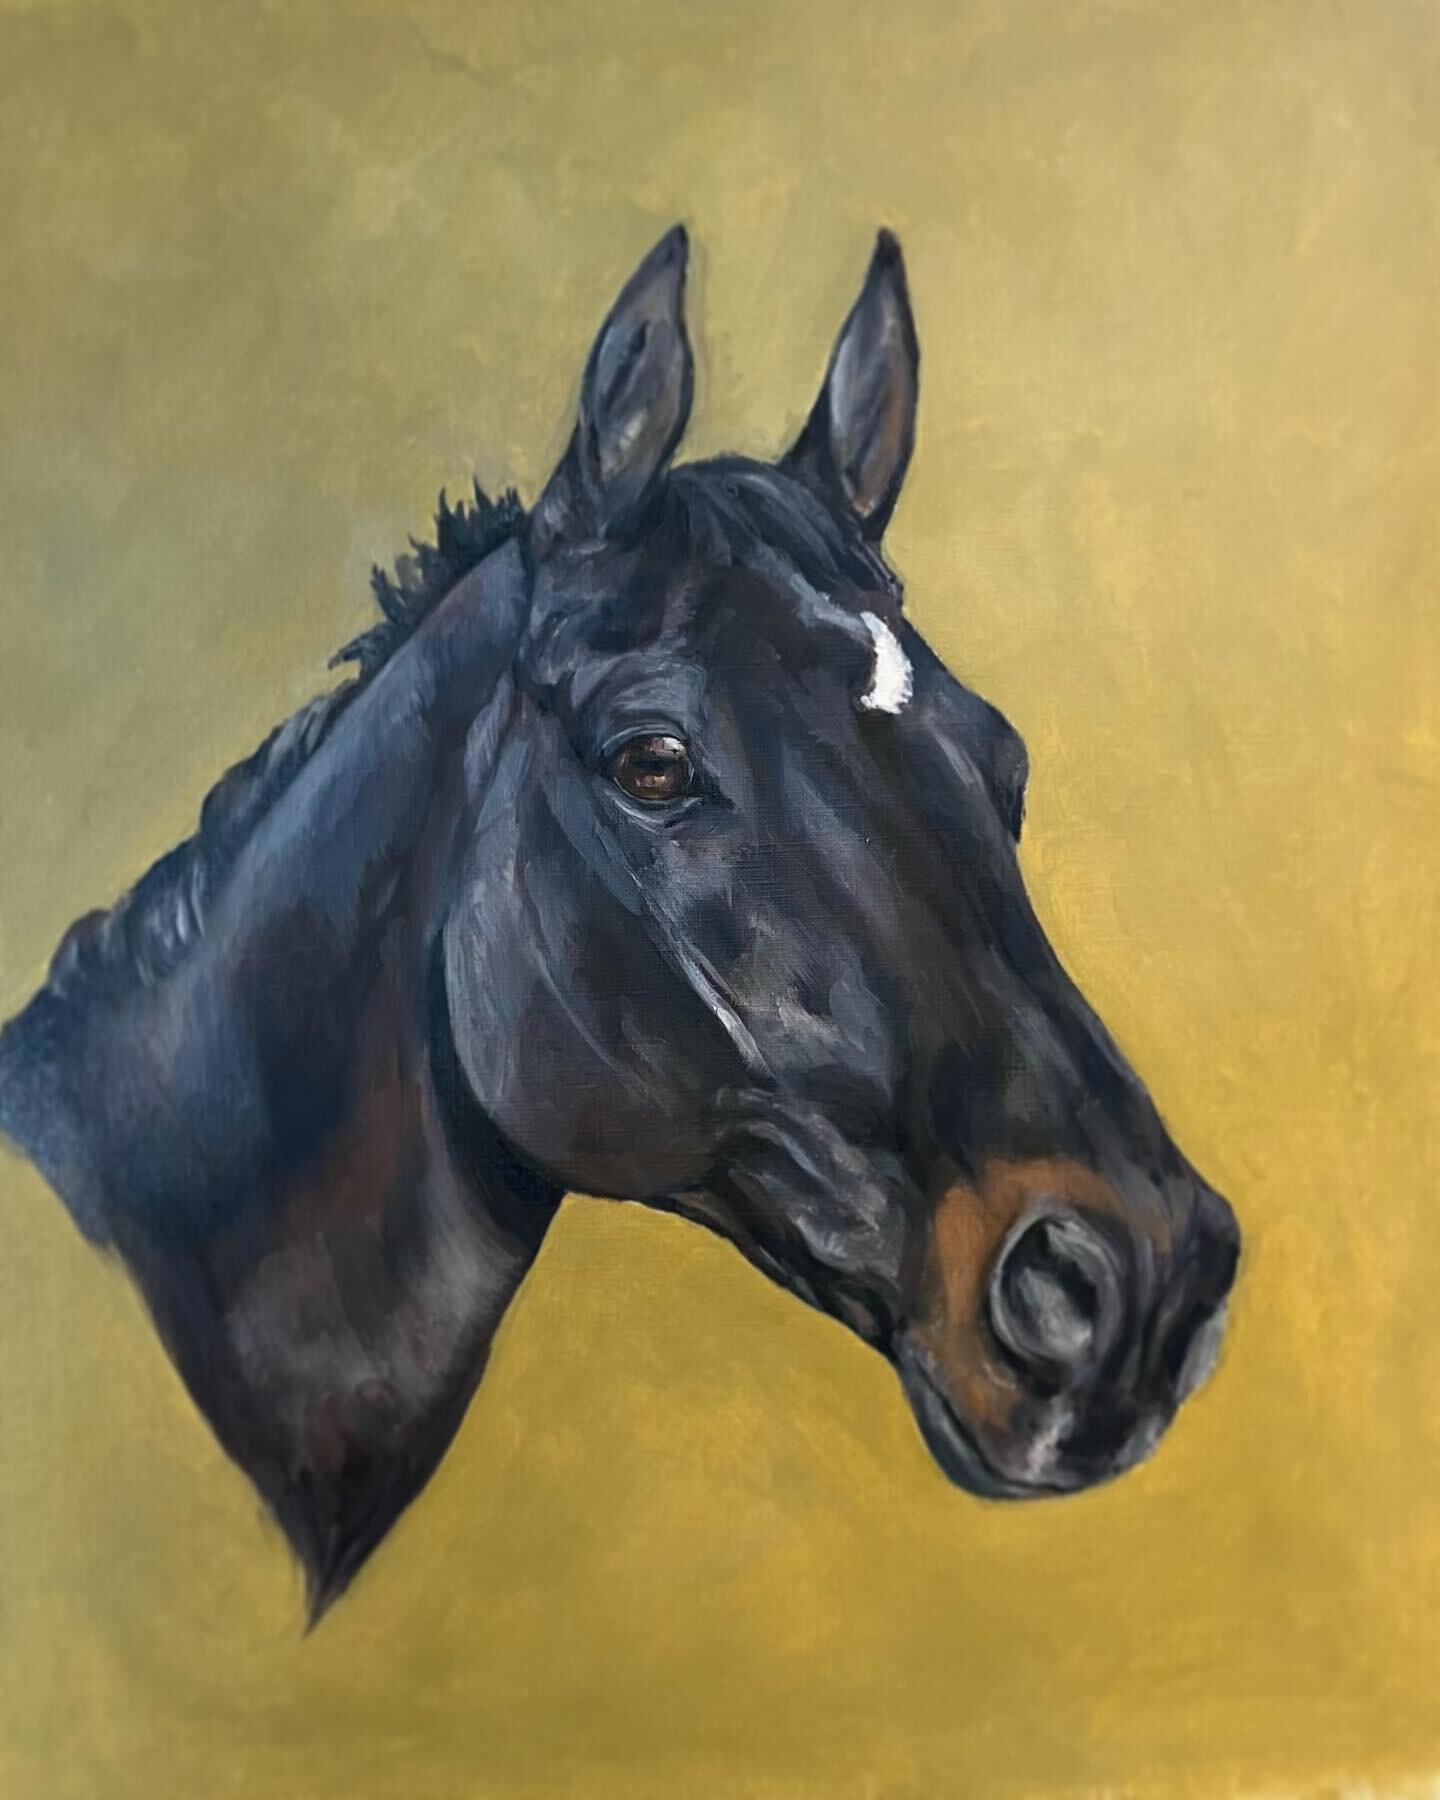 Tommy &ldquo;Big Tom&rdquo; legend of legend of horses. Many a fun filled day on this boy, so lovely to paint a face I know so well. #horseportrait #christmaspresent #hunter #horsesofinstagram #sportshorse #oilpainting #oilportrait #sophiehardenart